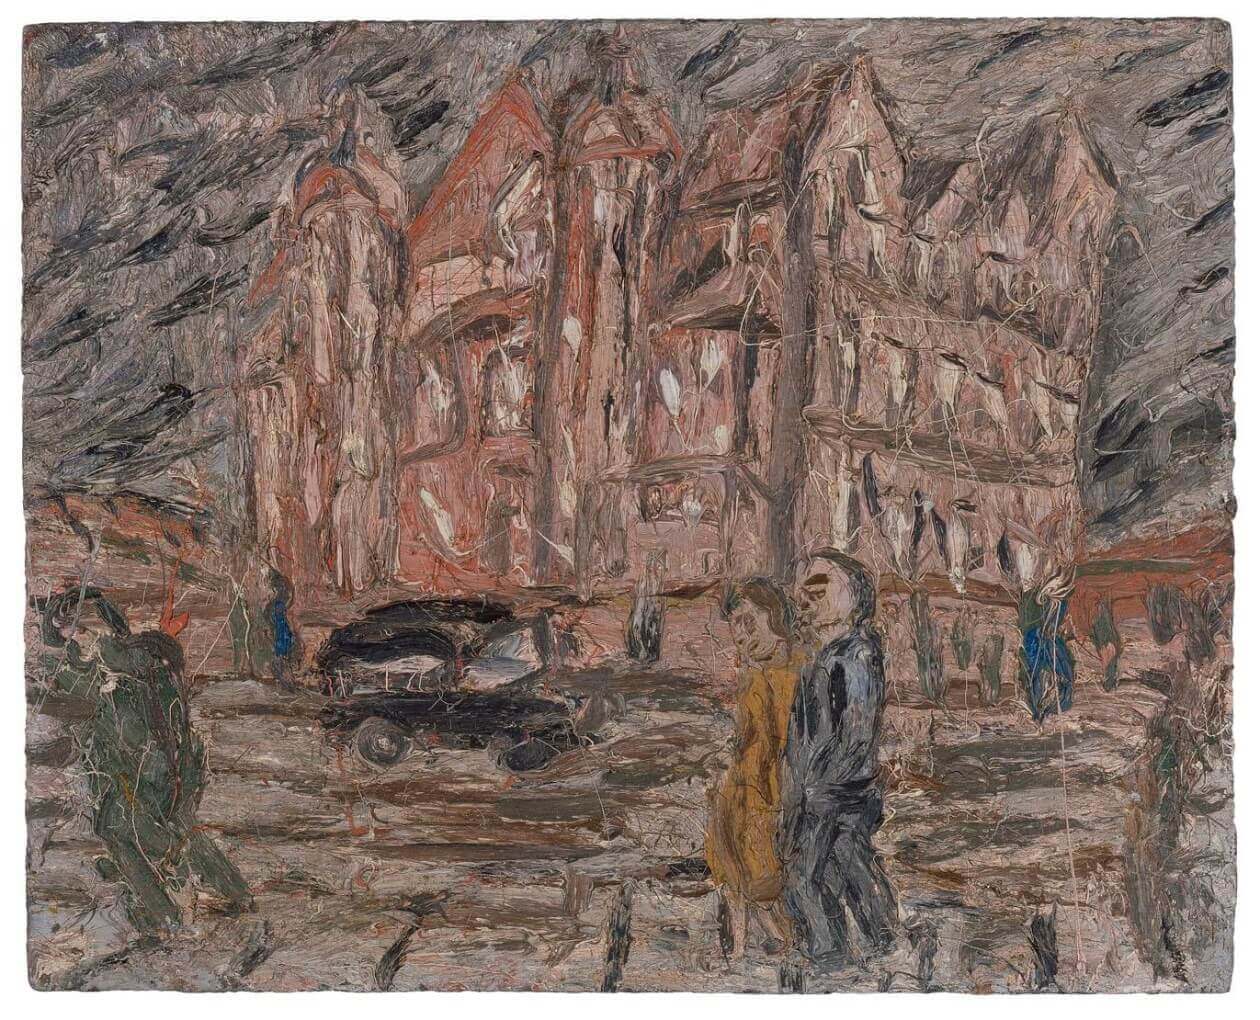 Leon Kossoff, Red Brick School Building, Winter, 
1982, oil on board,
48 by 60 inches (courtesy of Mitchell-Innes & Nash)